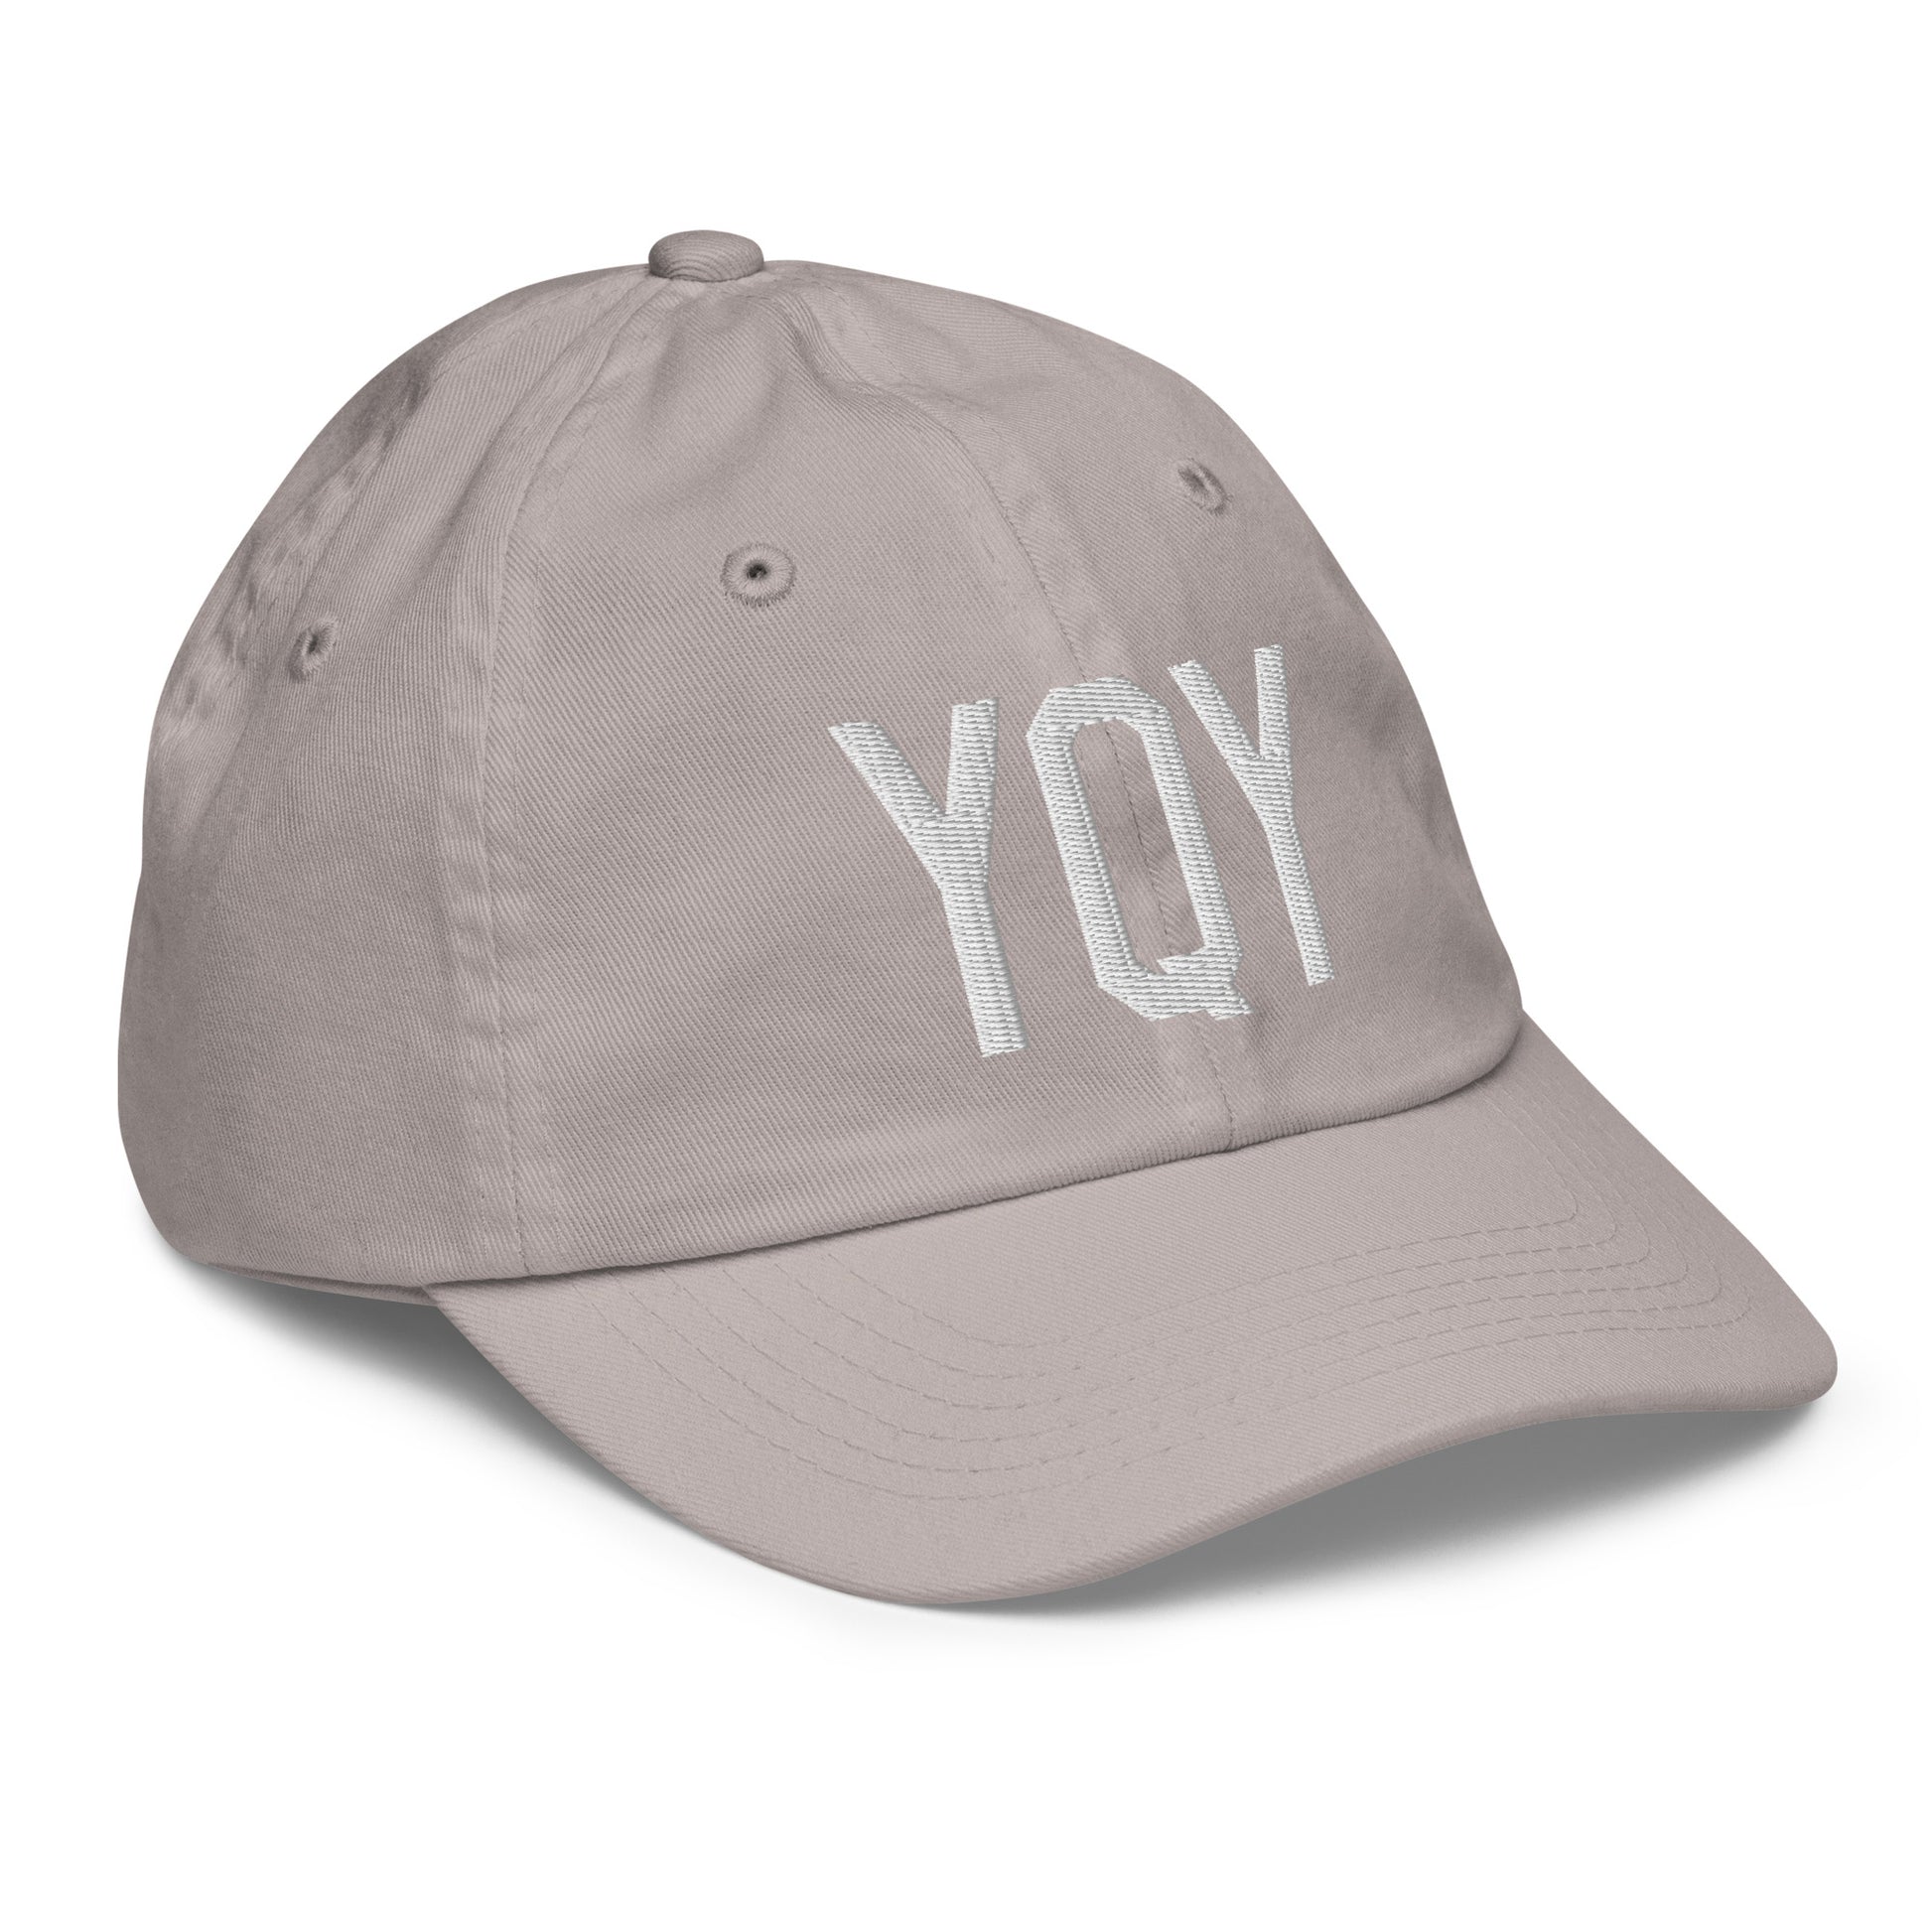 Airport Code Kid's Baseball Cap - White • YQY Sydney • YHM Designs - Image 26